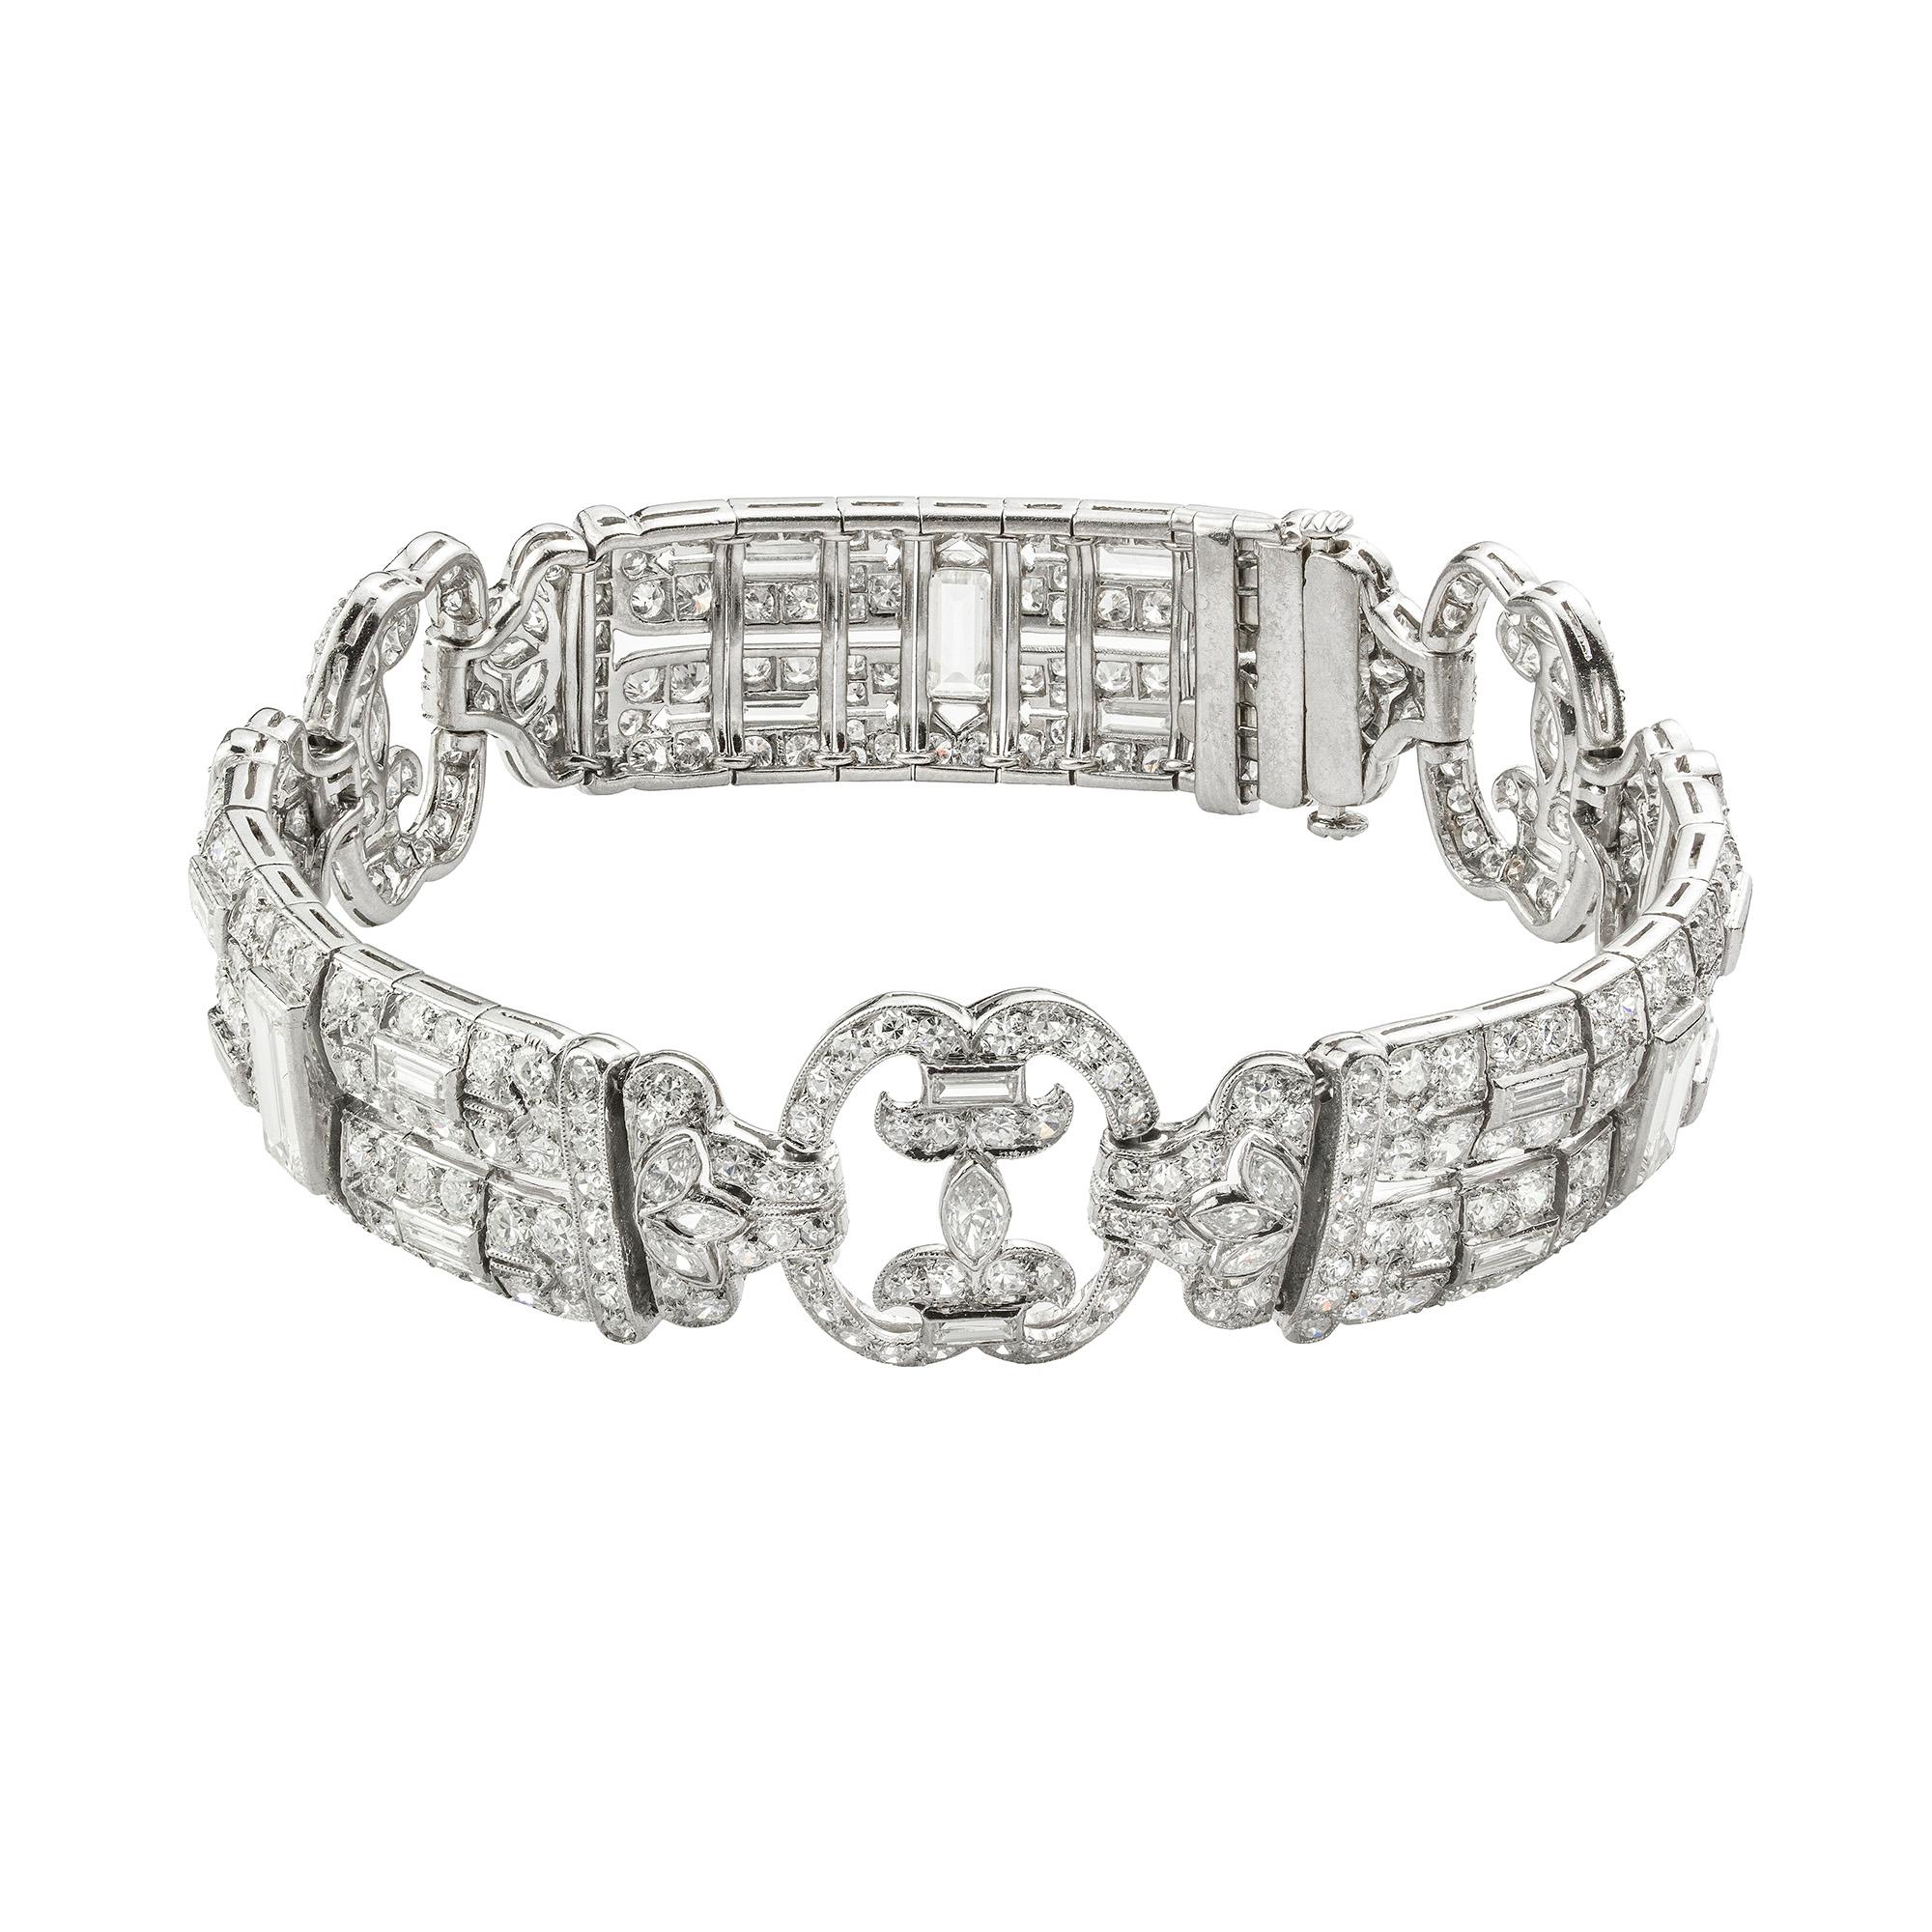 This exquisite bracelet comes from the collection of Bentley & Skinner, the London jewellers by appointment to both Her Majesty the Queen and His Royal Highness the Prince of Wales. Created in around 1925, this piece incorporates the classic